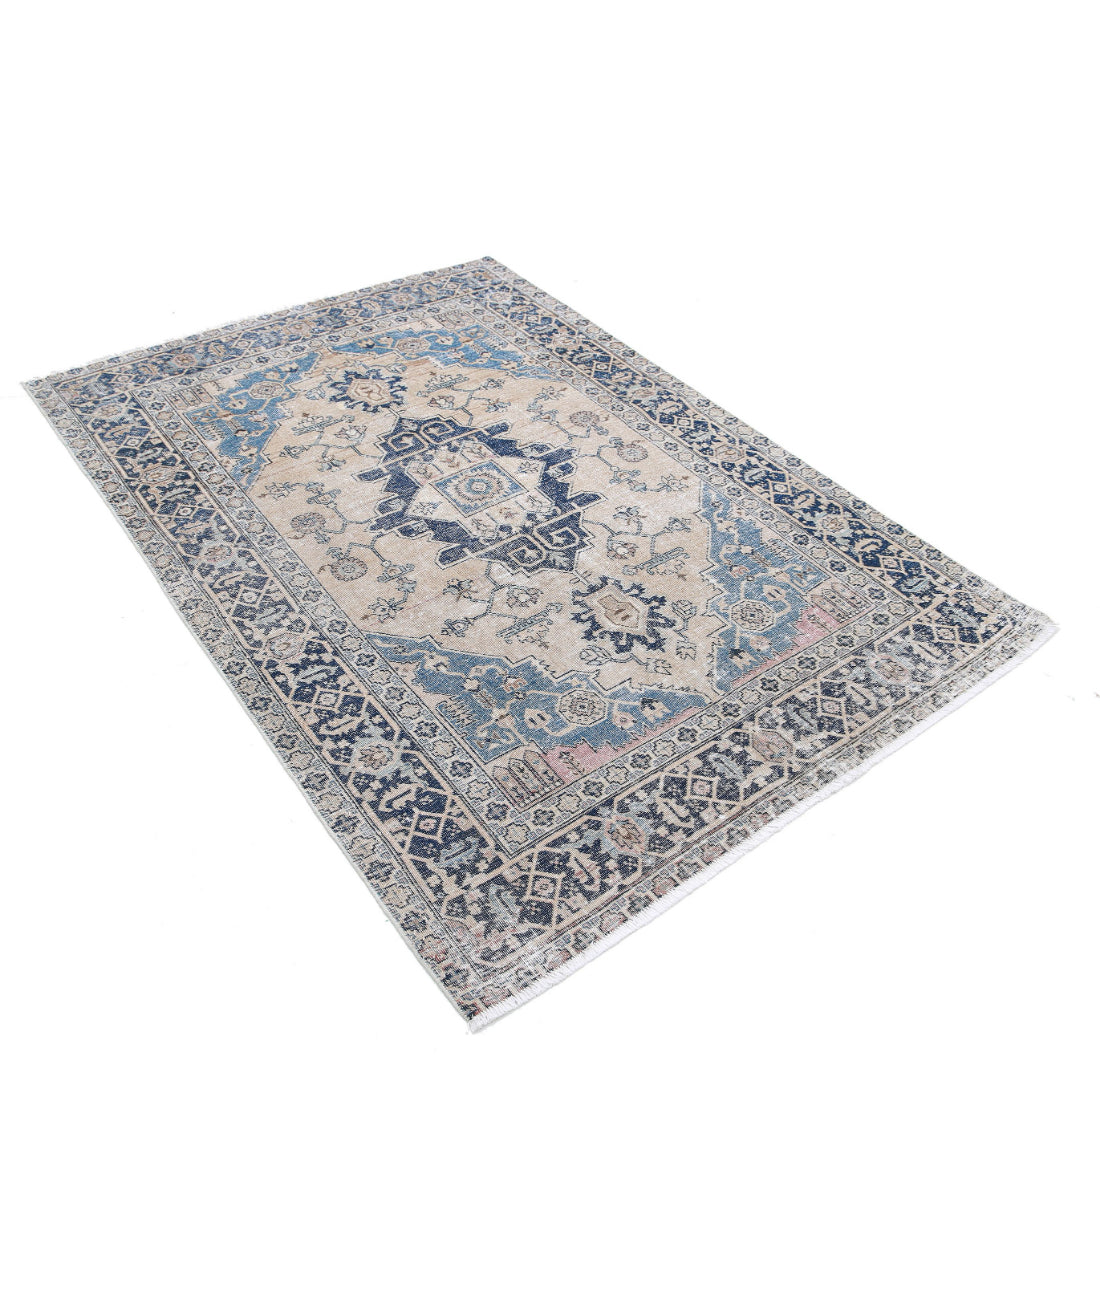 Hand Knotted Vintage Distressed Persian Heriz Wool Rug - 4'5'' x 6'3'' 4'5'' x 6'3'' (133 X 188) / Beige / Blue